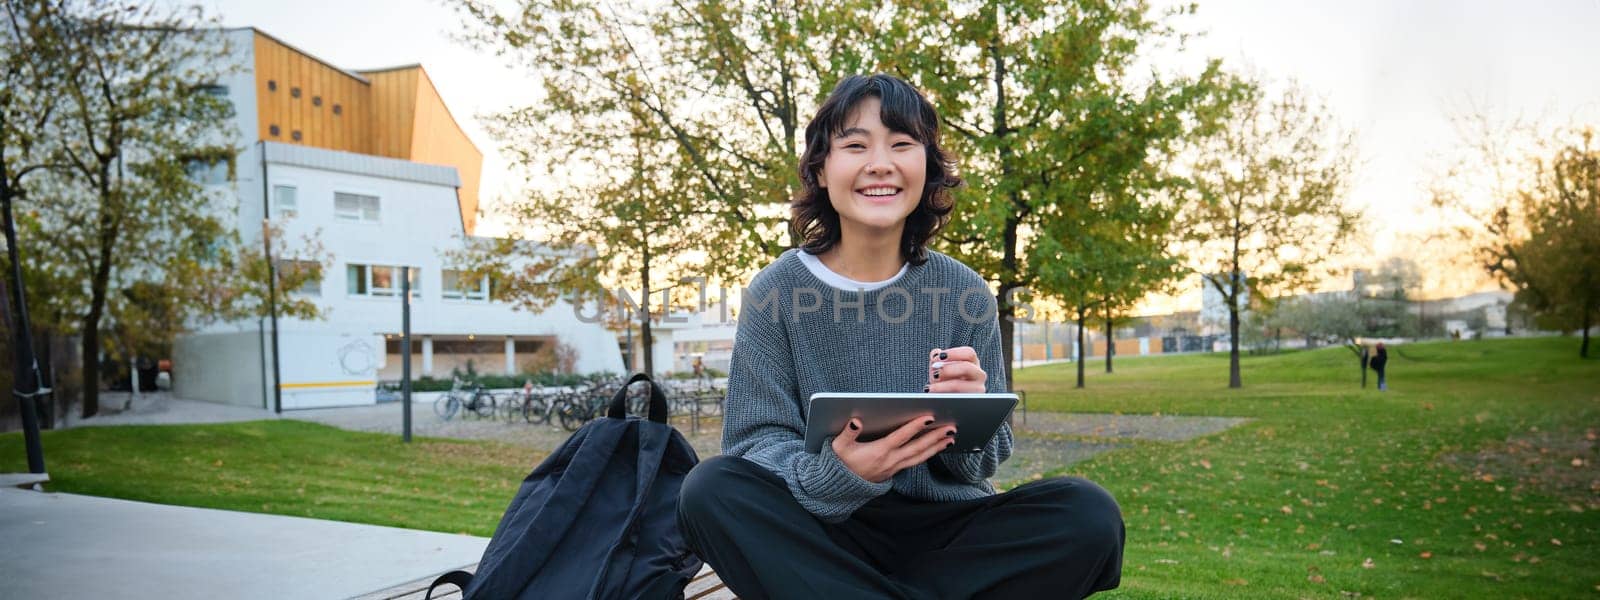 Young asian girl, student sits on bench, graphic designer with pencil and digital tablet draws scatches, does her homework outdoors.